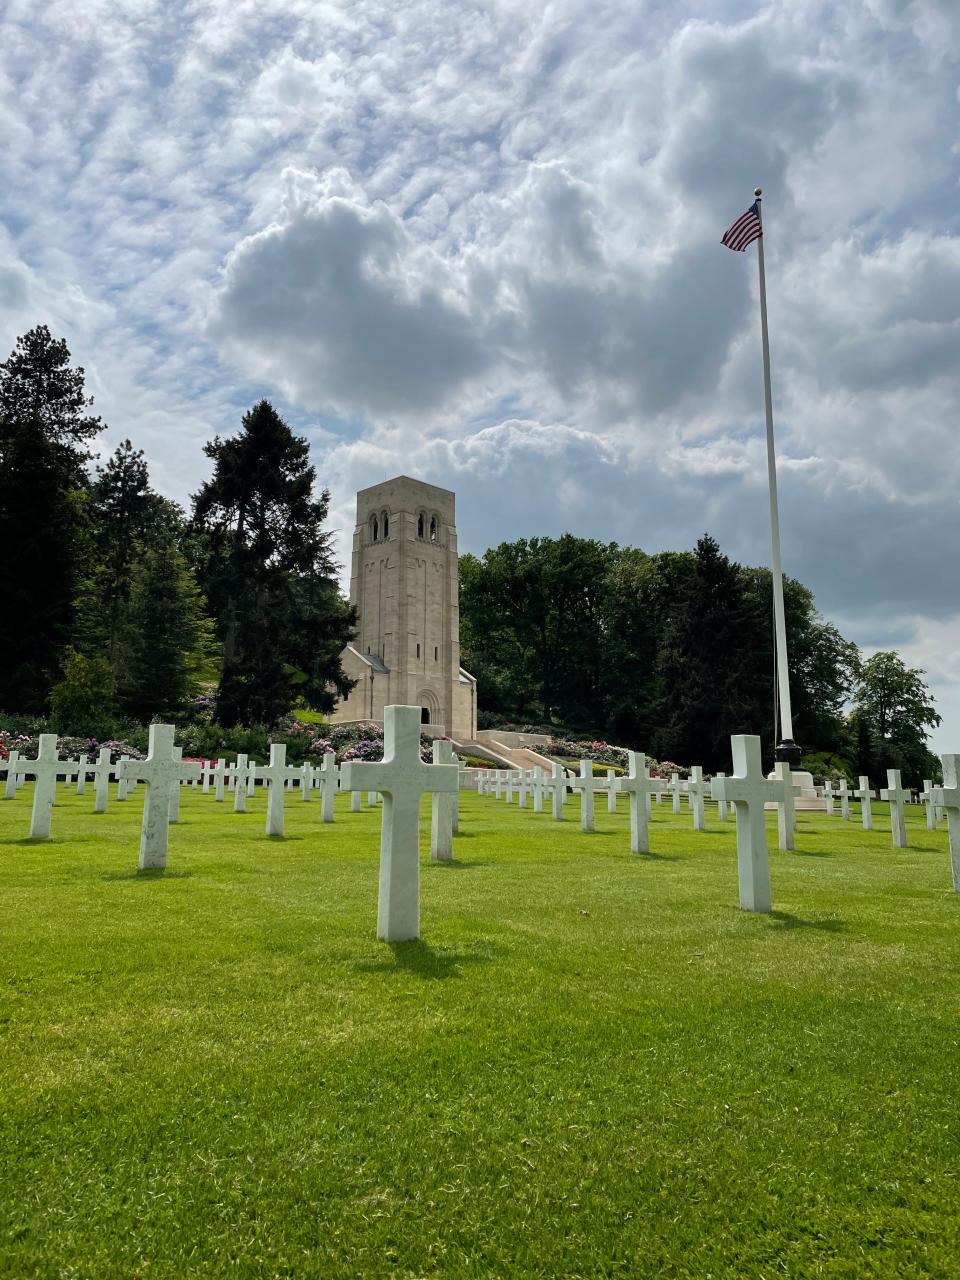 Aisne-Marne American Cemetery, the location where Pvt. Laurens Bennett Strain was buried before being brought home.